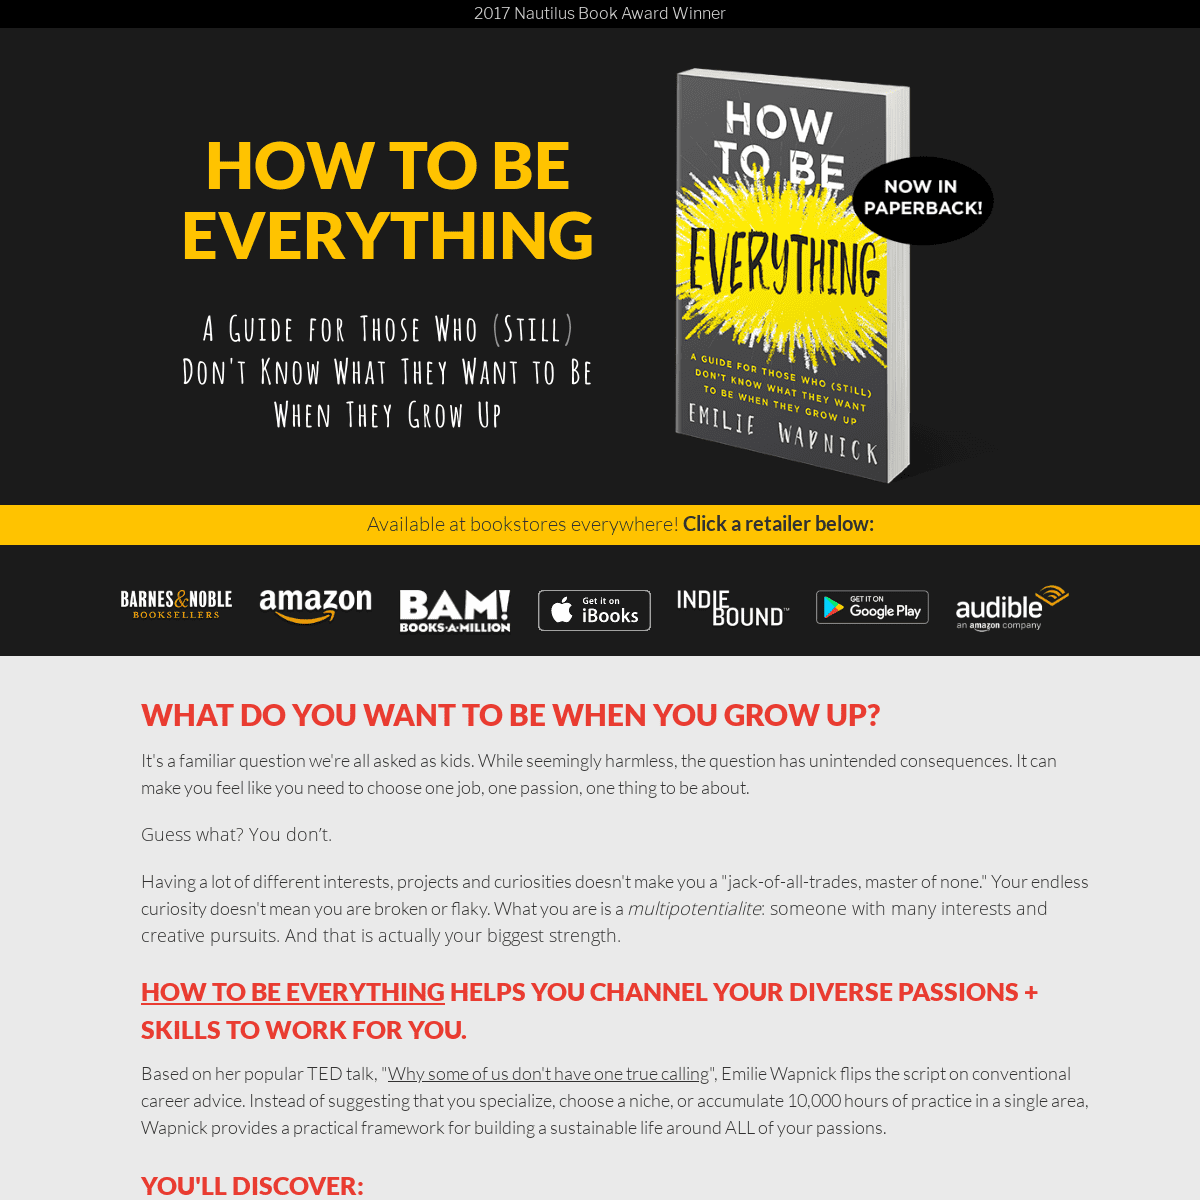 A complete backup of howtobeeverything.com